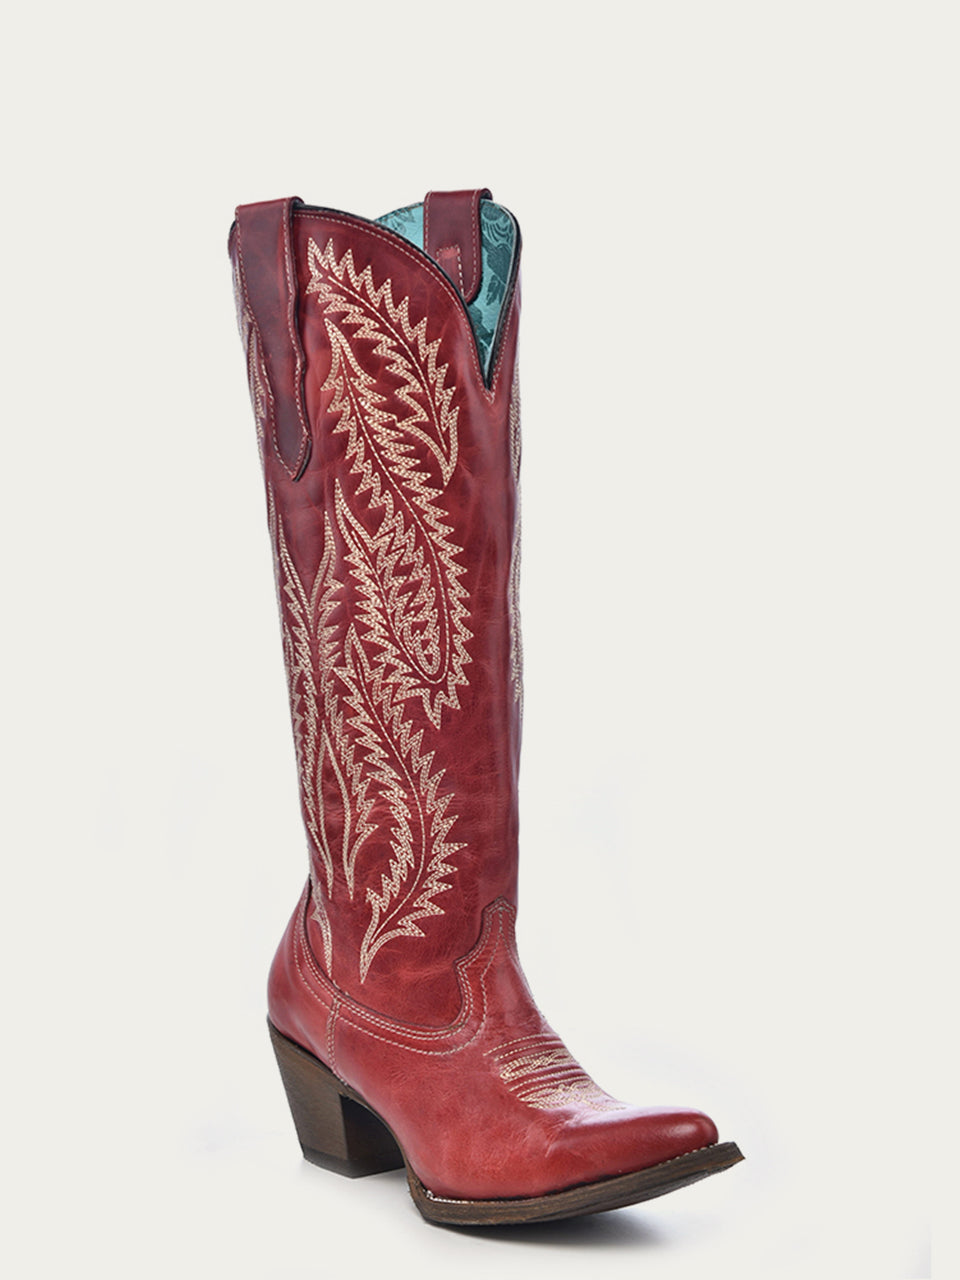 E1318 - WOMEN'S EMBROIDERY RED TALL TOP SNIP TOE COWBOY BOOT